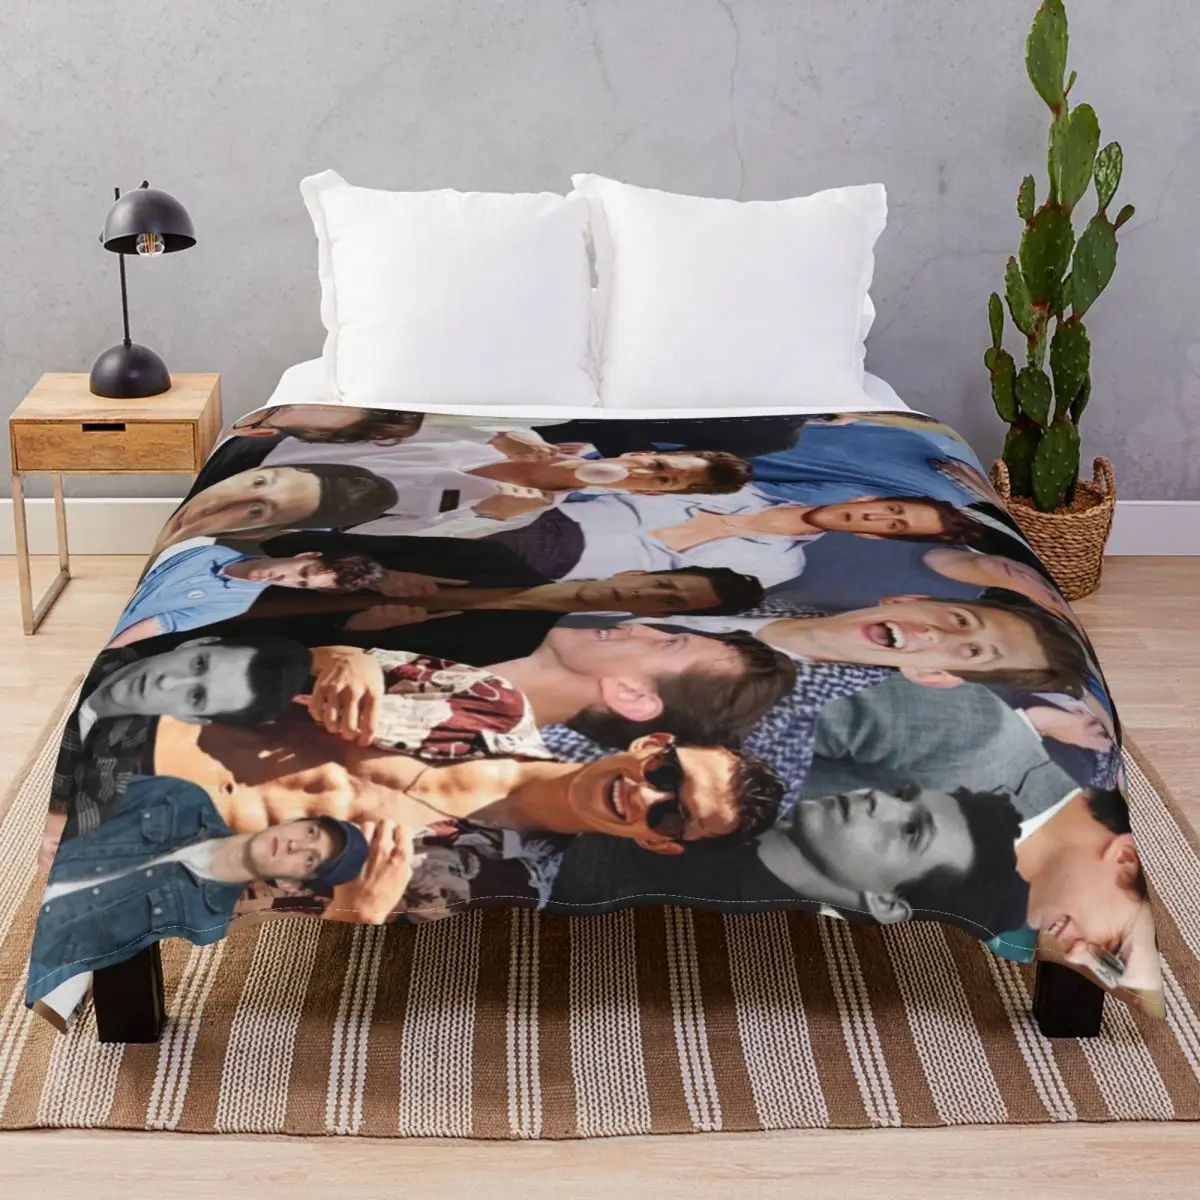 Tom Holland Photo Collage Blanket Fleece Printed Comfortable Unisex Throw Blankets for Bed Home Couch Camp Office